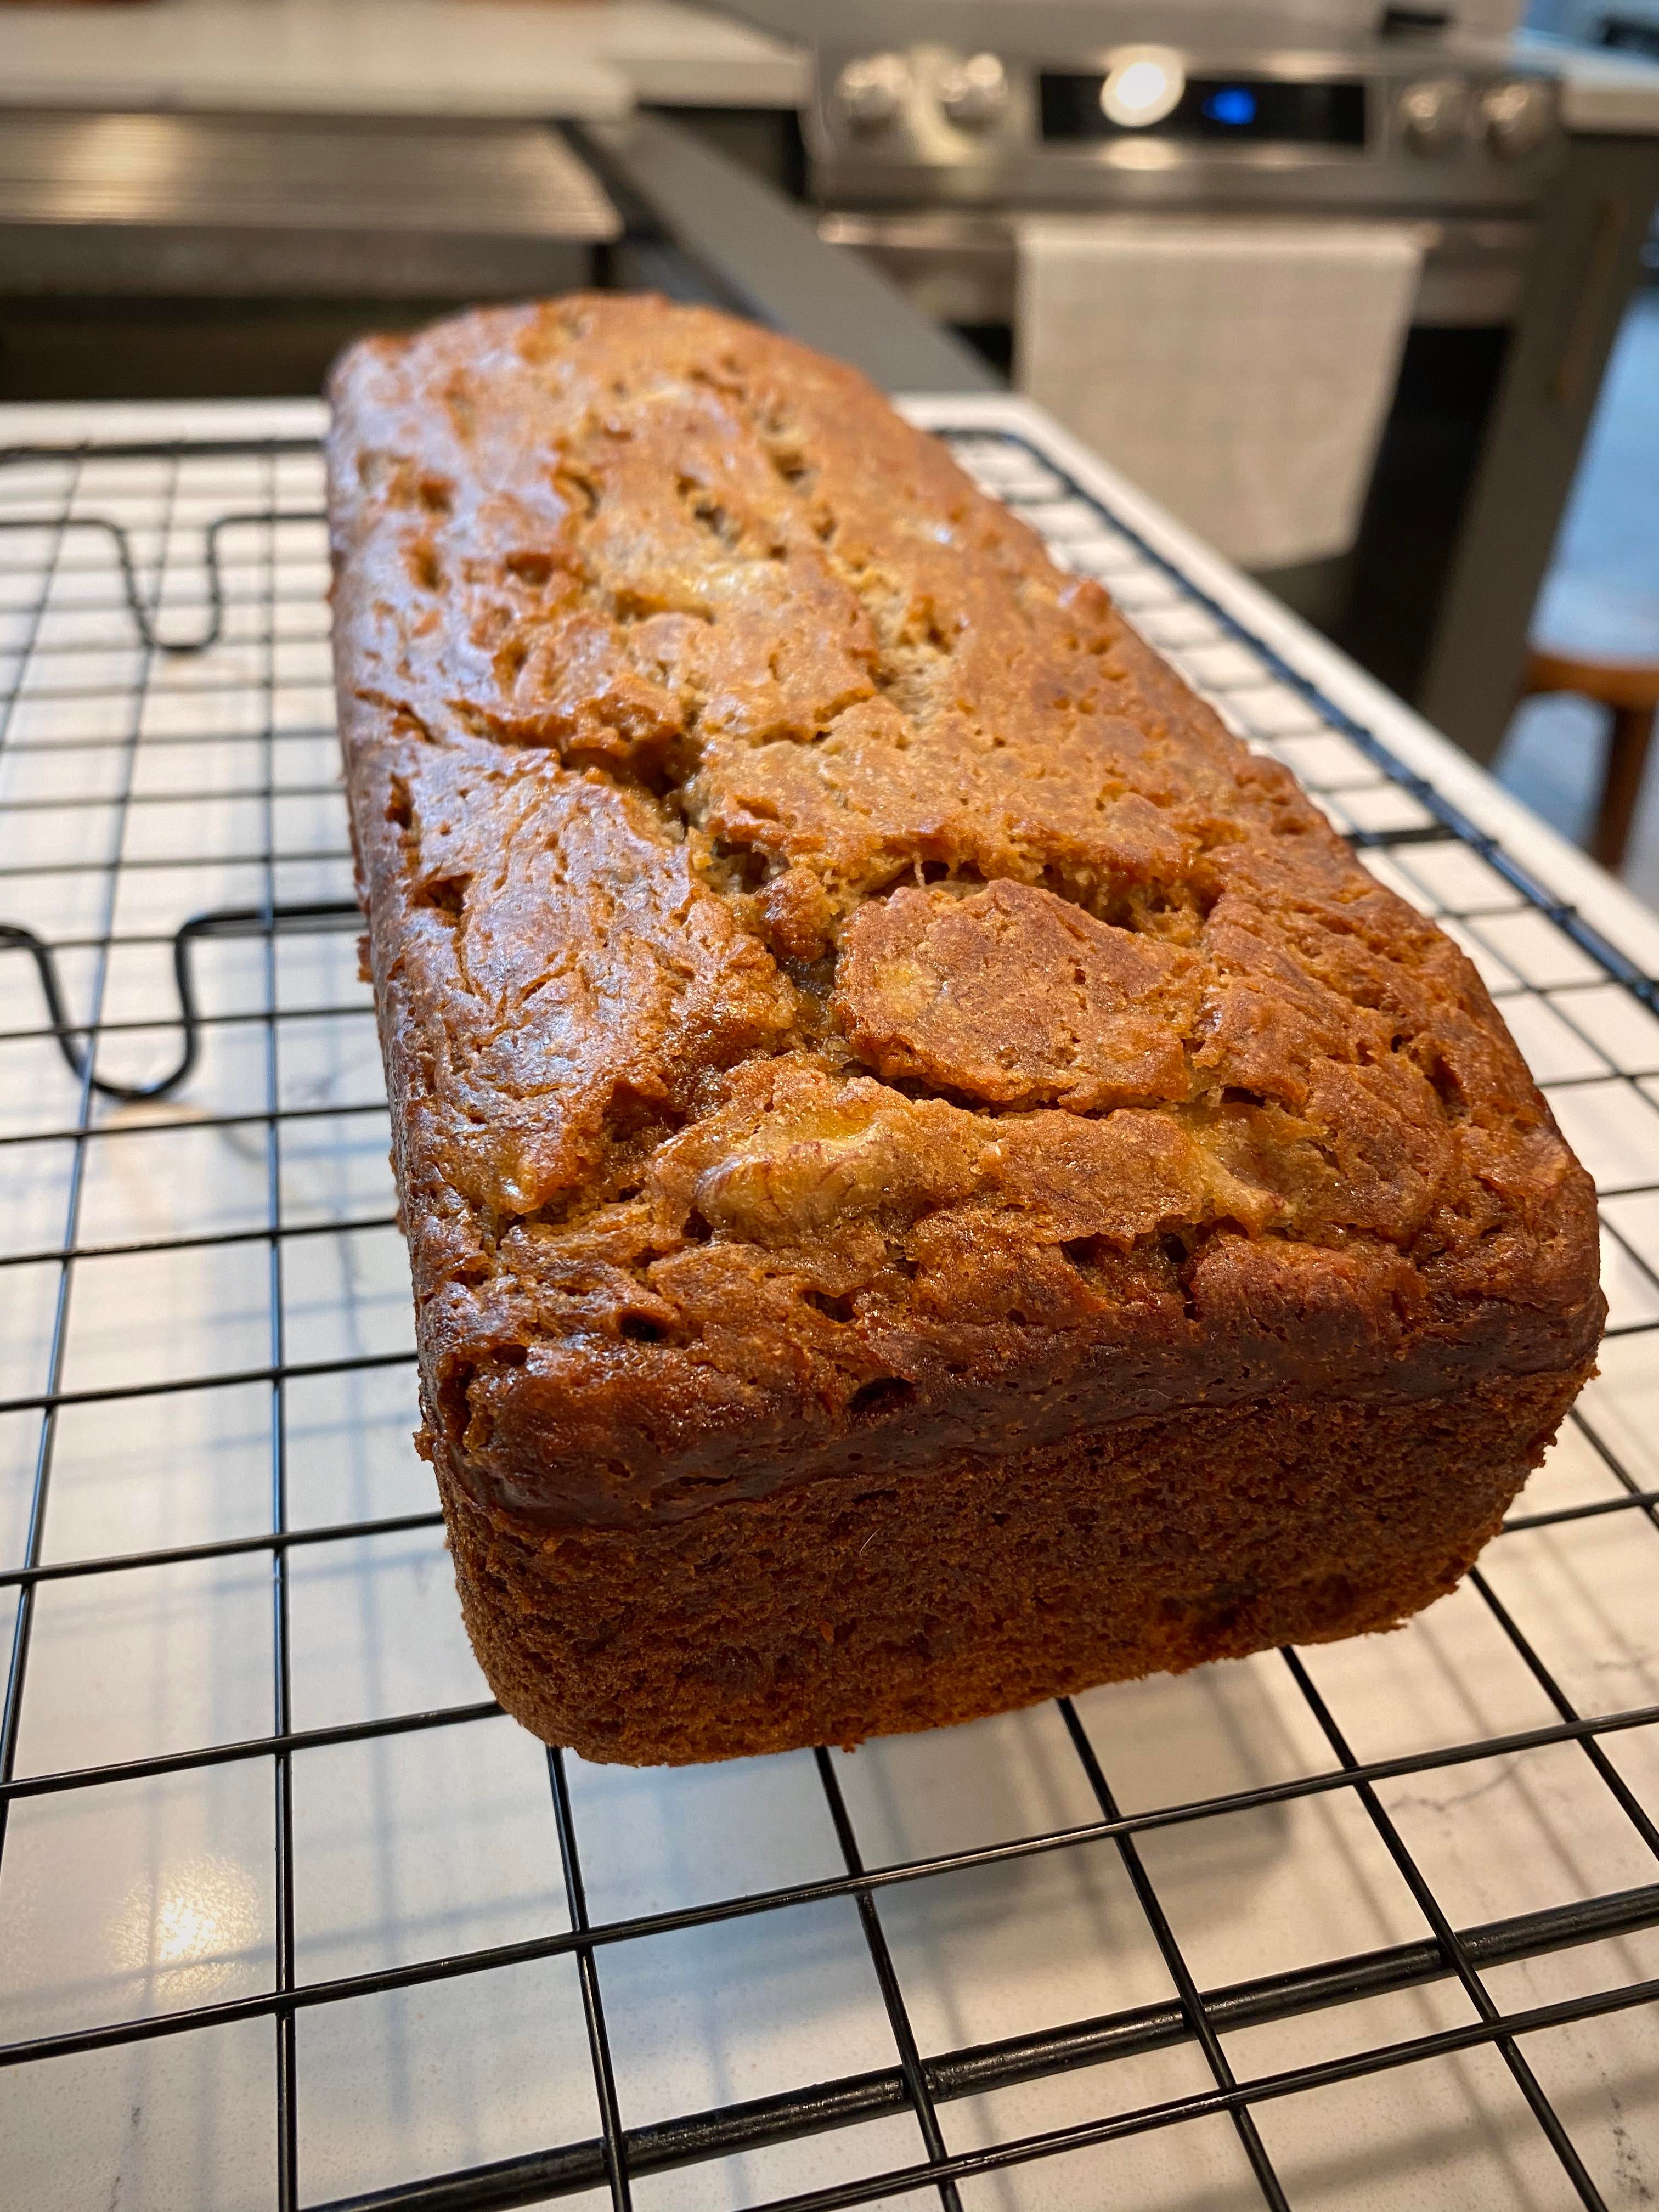 Just Discovered Reddit This Is Of My Very First Bread Banana Bread Dining And Cooking